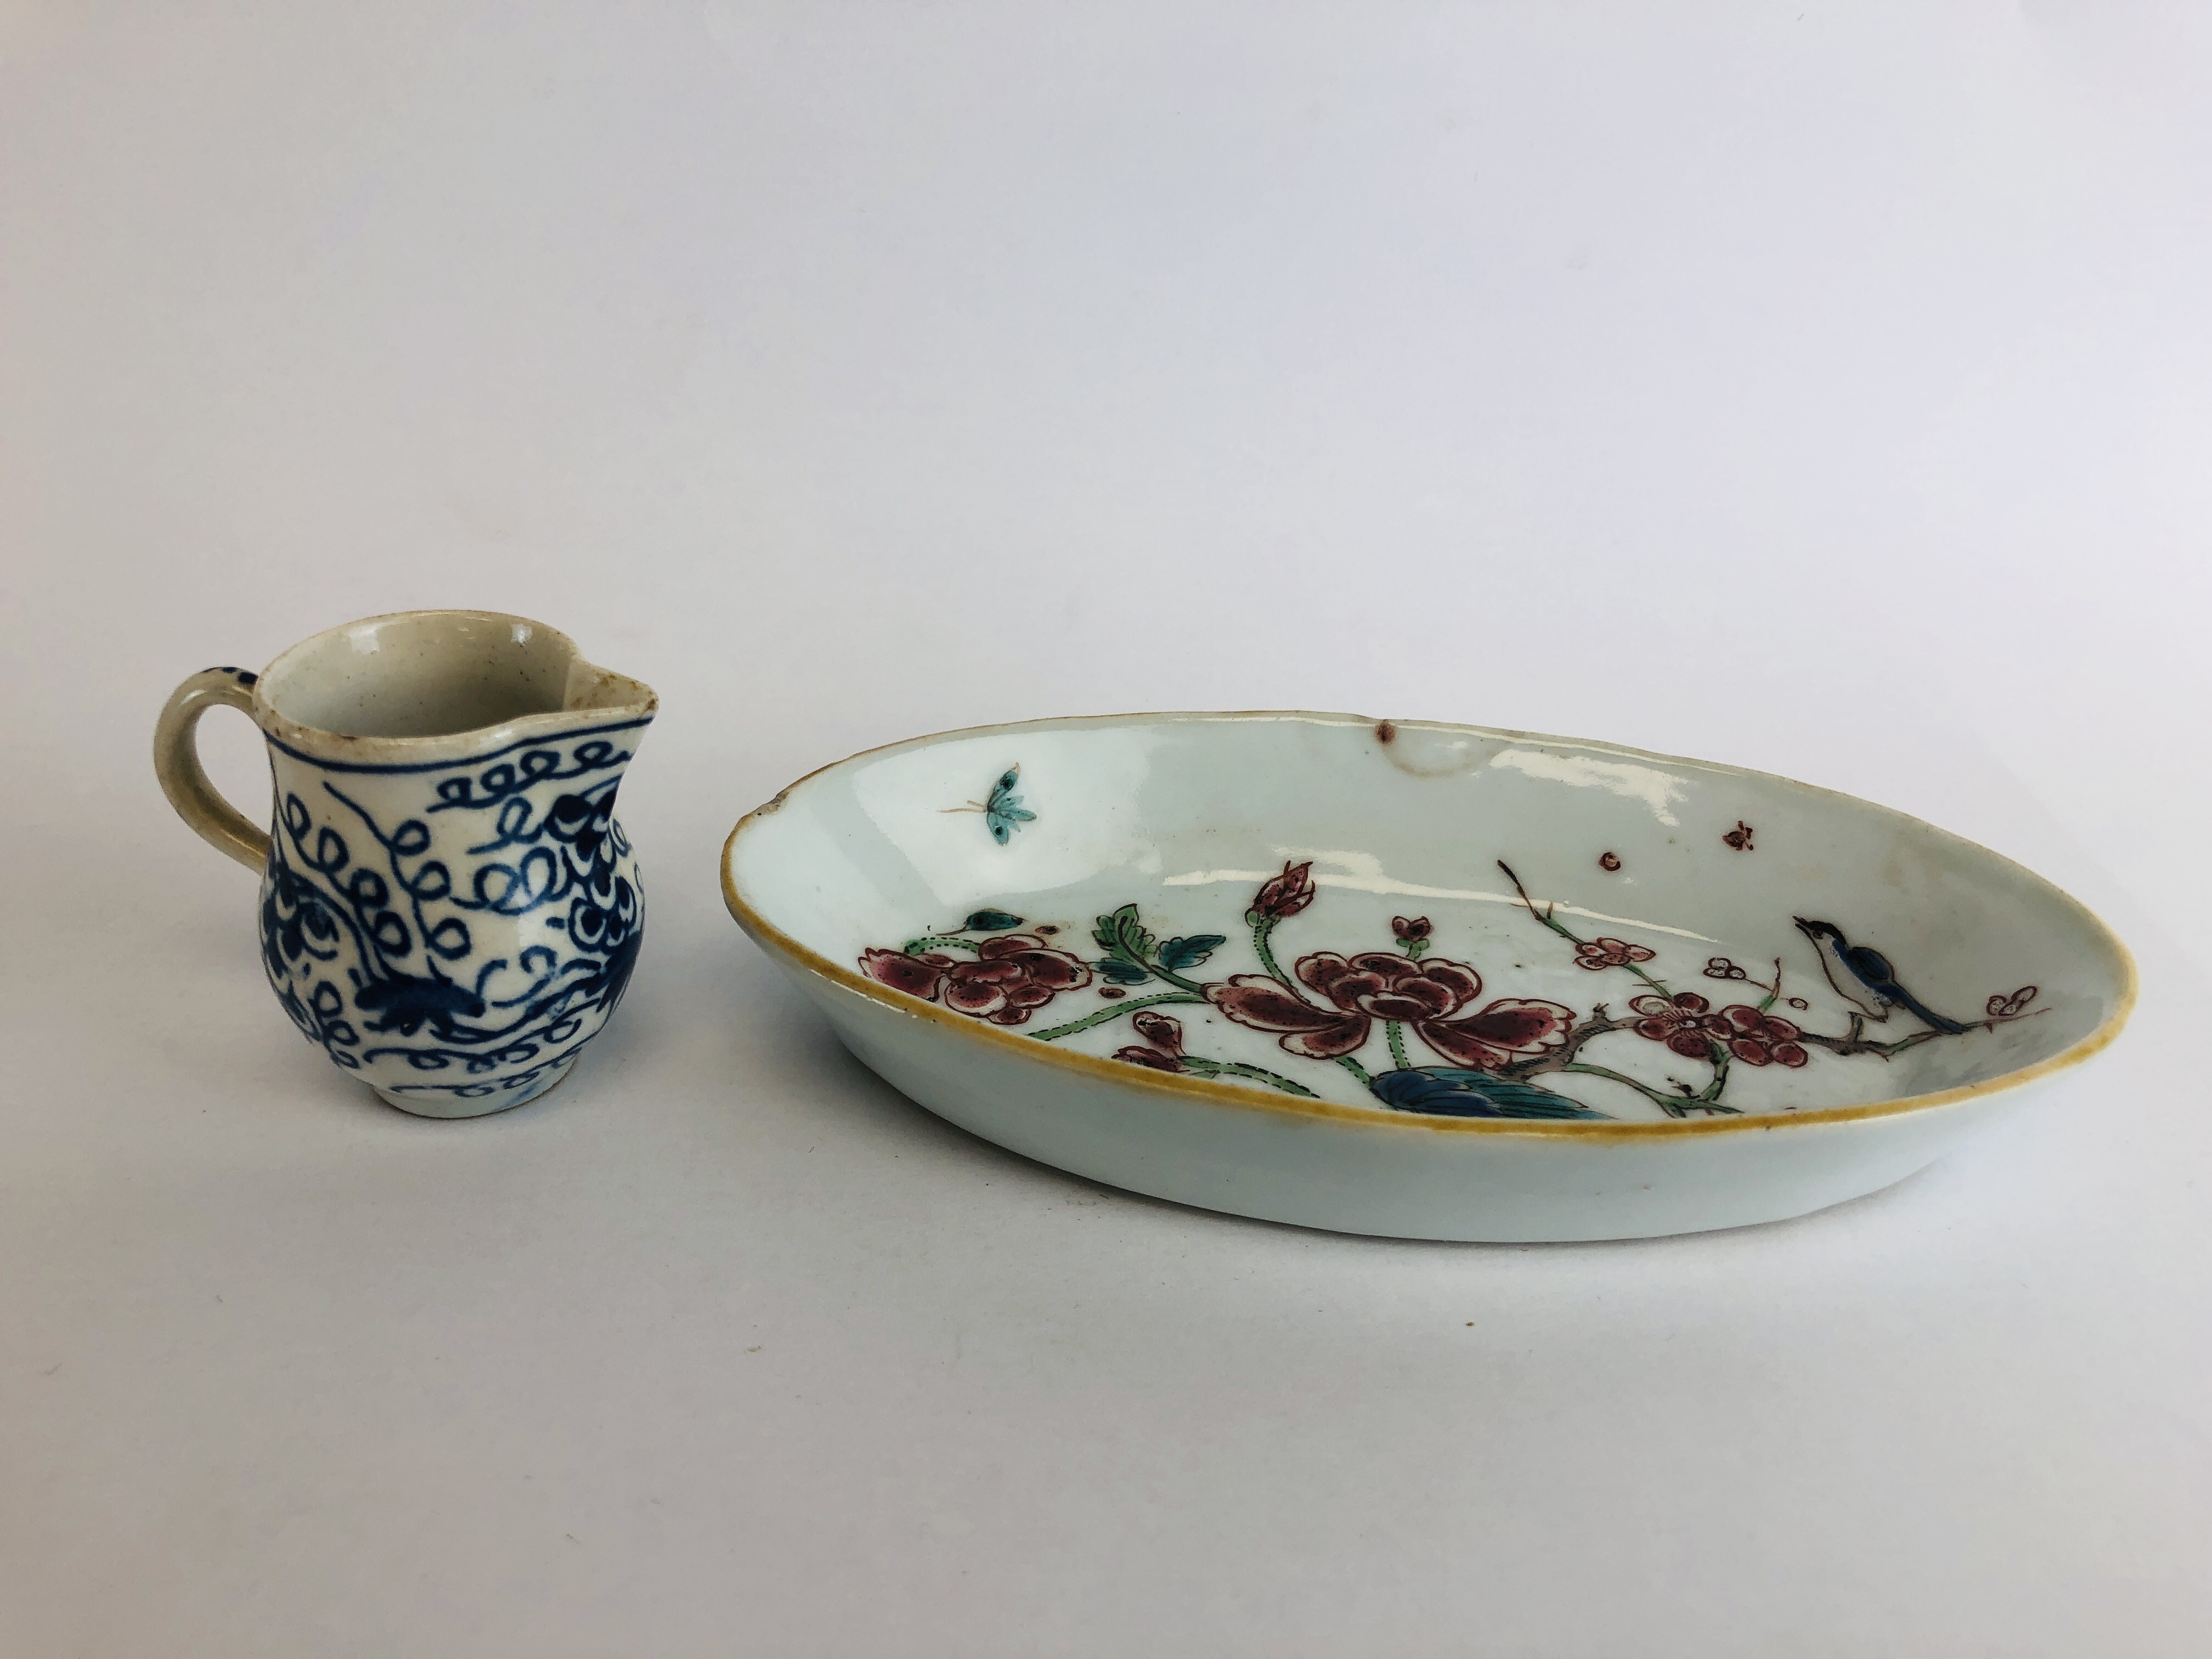 A BOW BLUE AND WHITE MINIATURE MILK JUG H 4CM ALONG WITH A CHINESE QIAN LONG OVAL SPOON TRAY L 13.